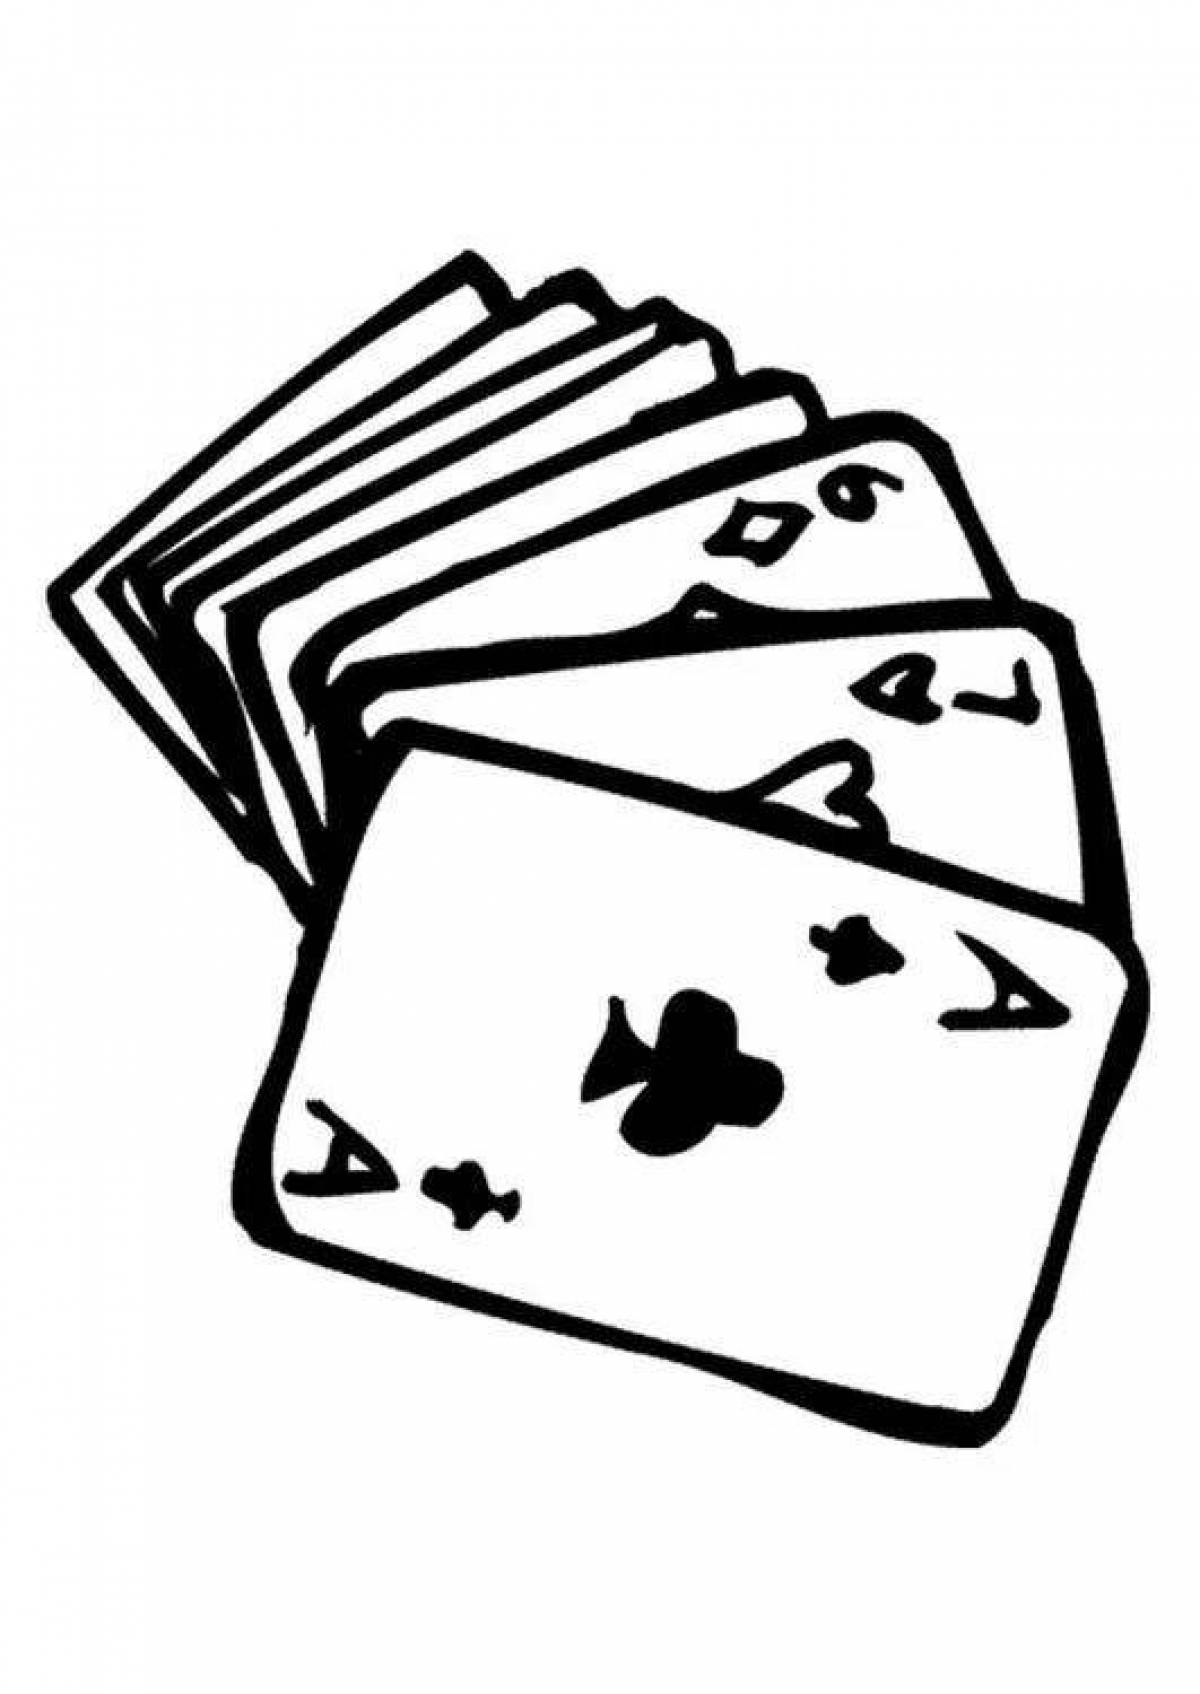 Playing cards #3